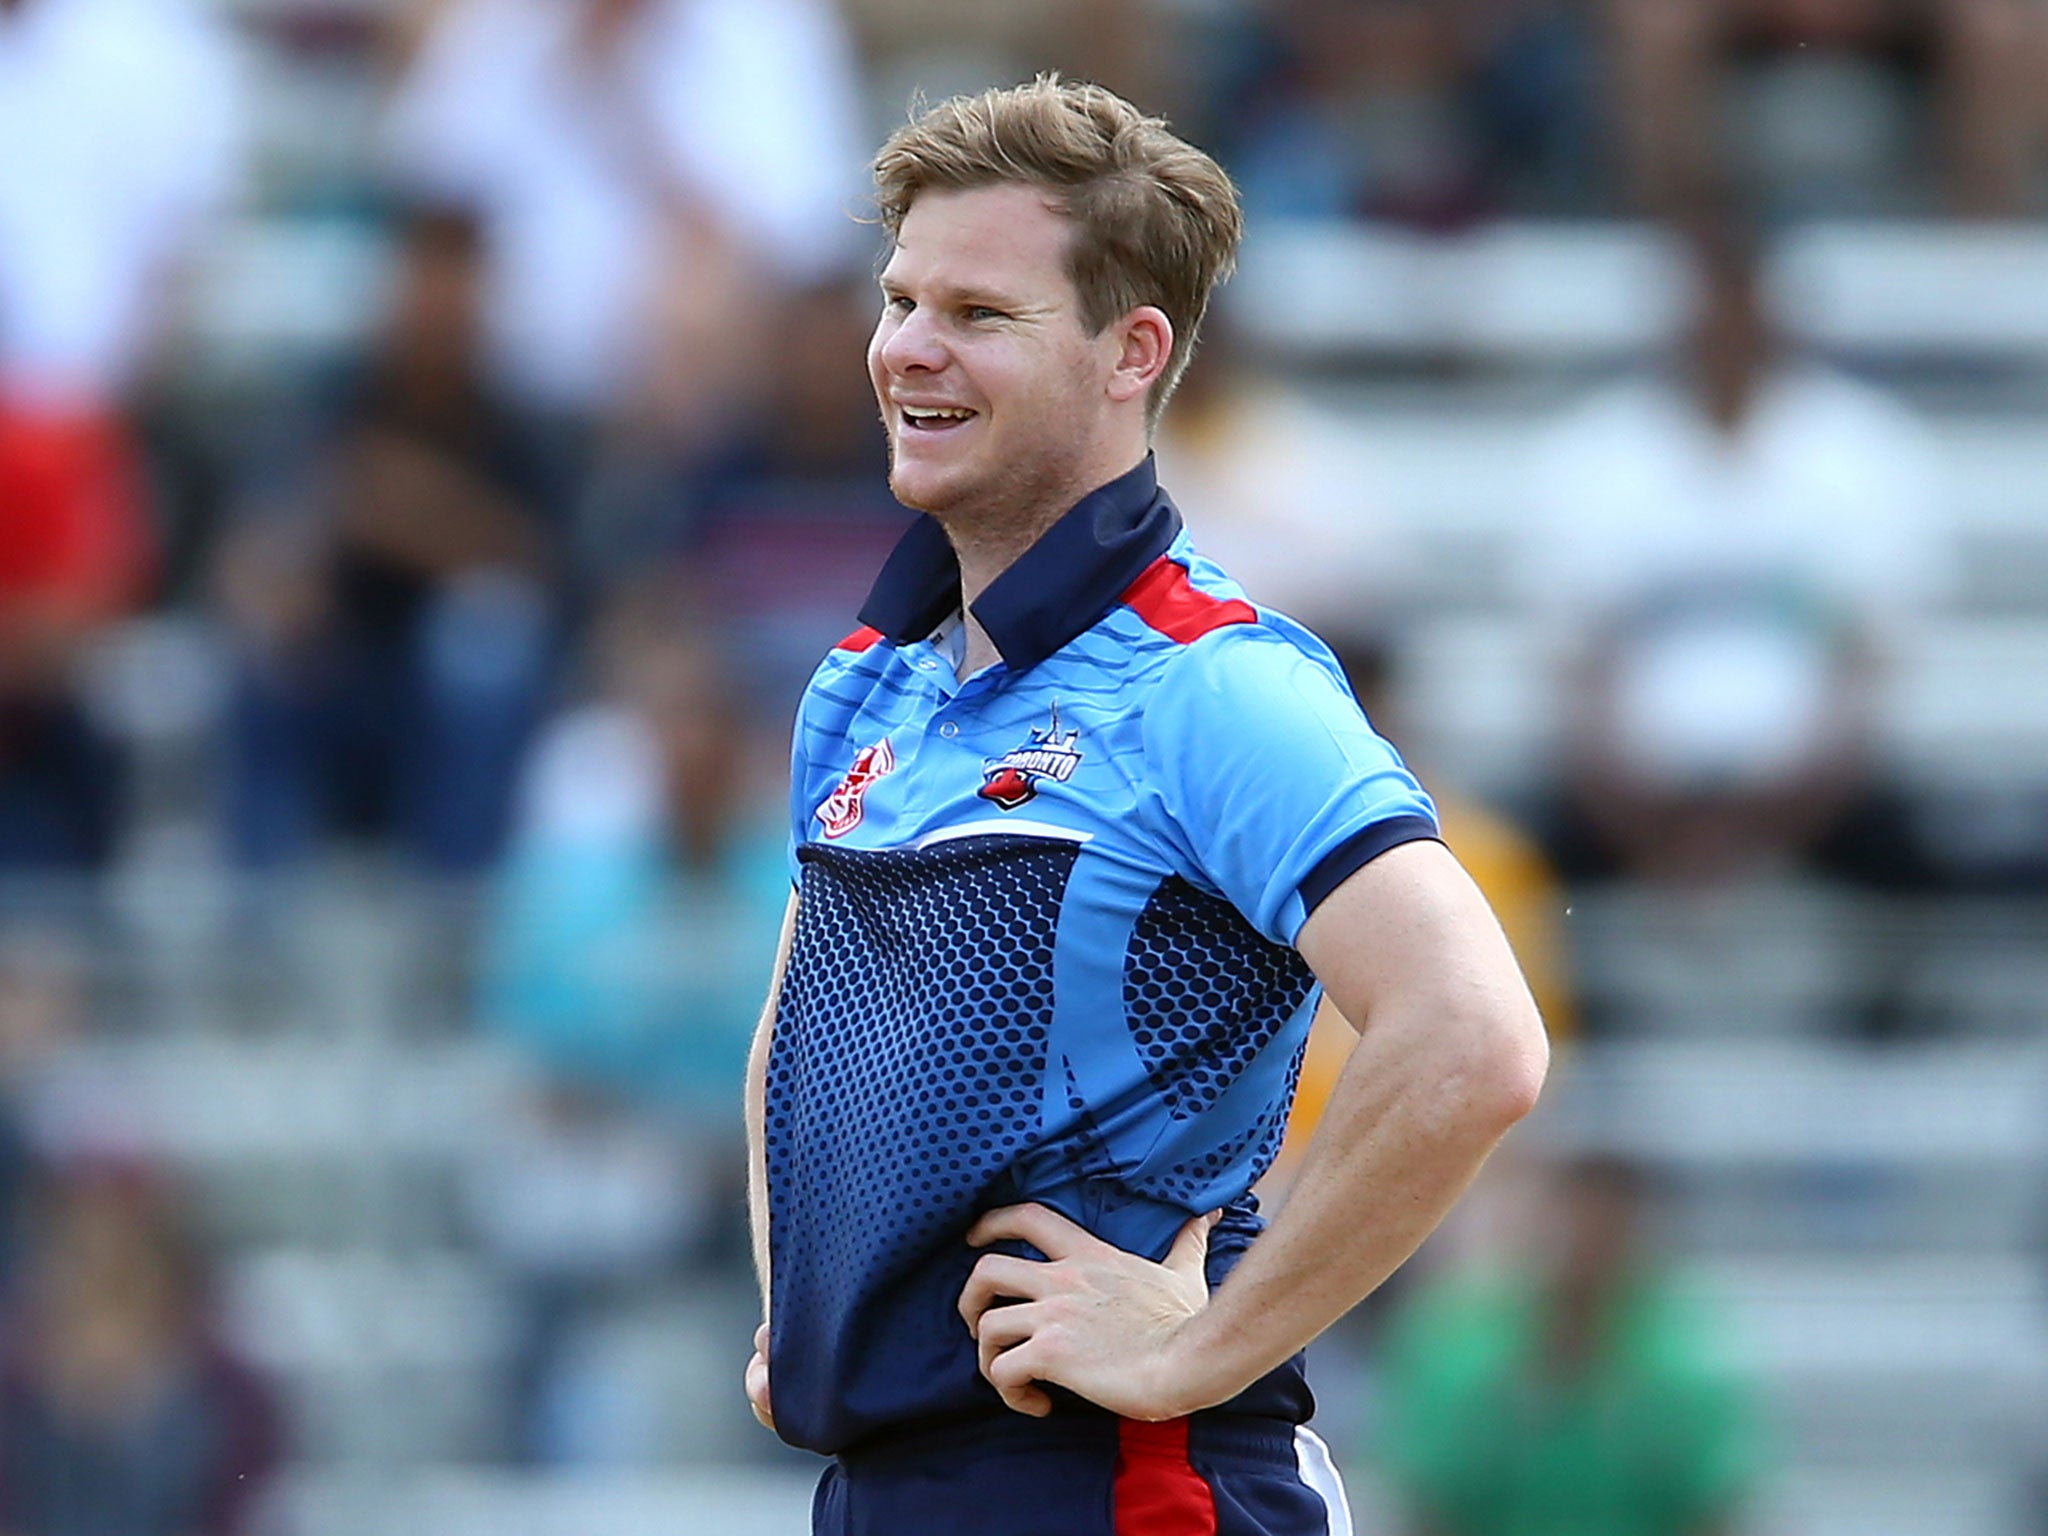 Steve Smith's ban comes to an end on 28 March